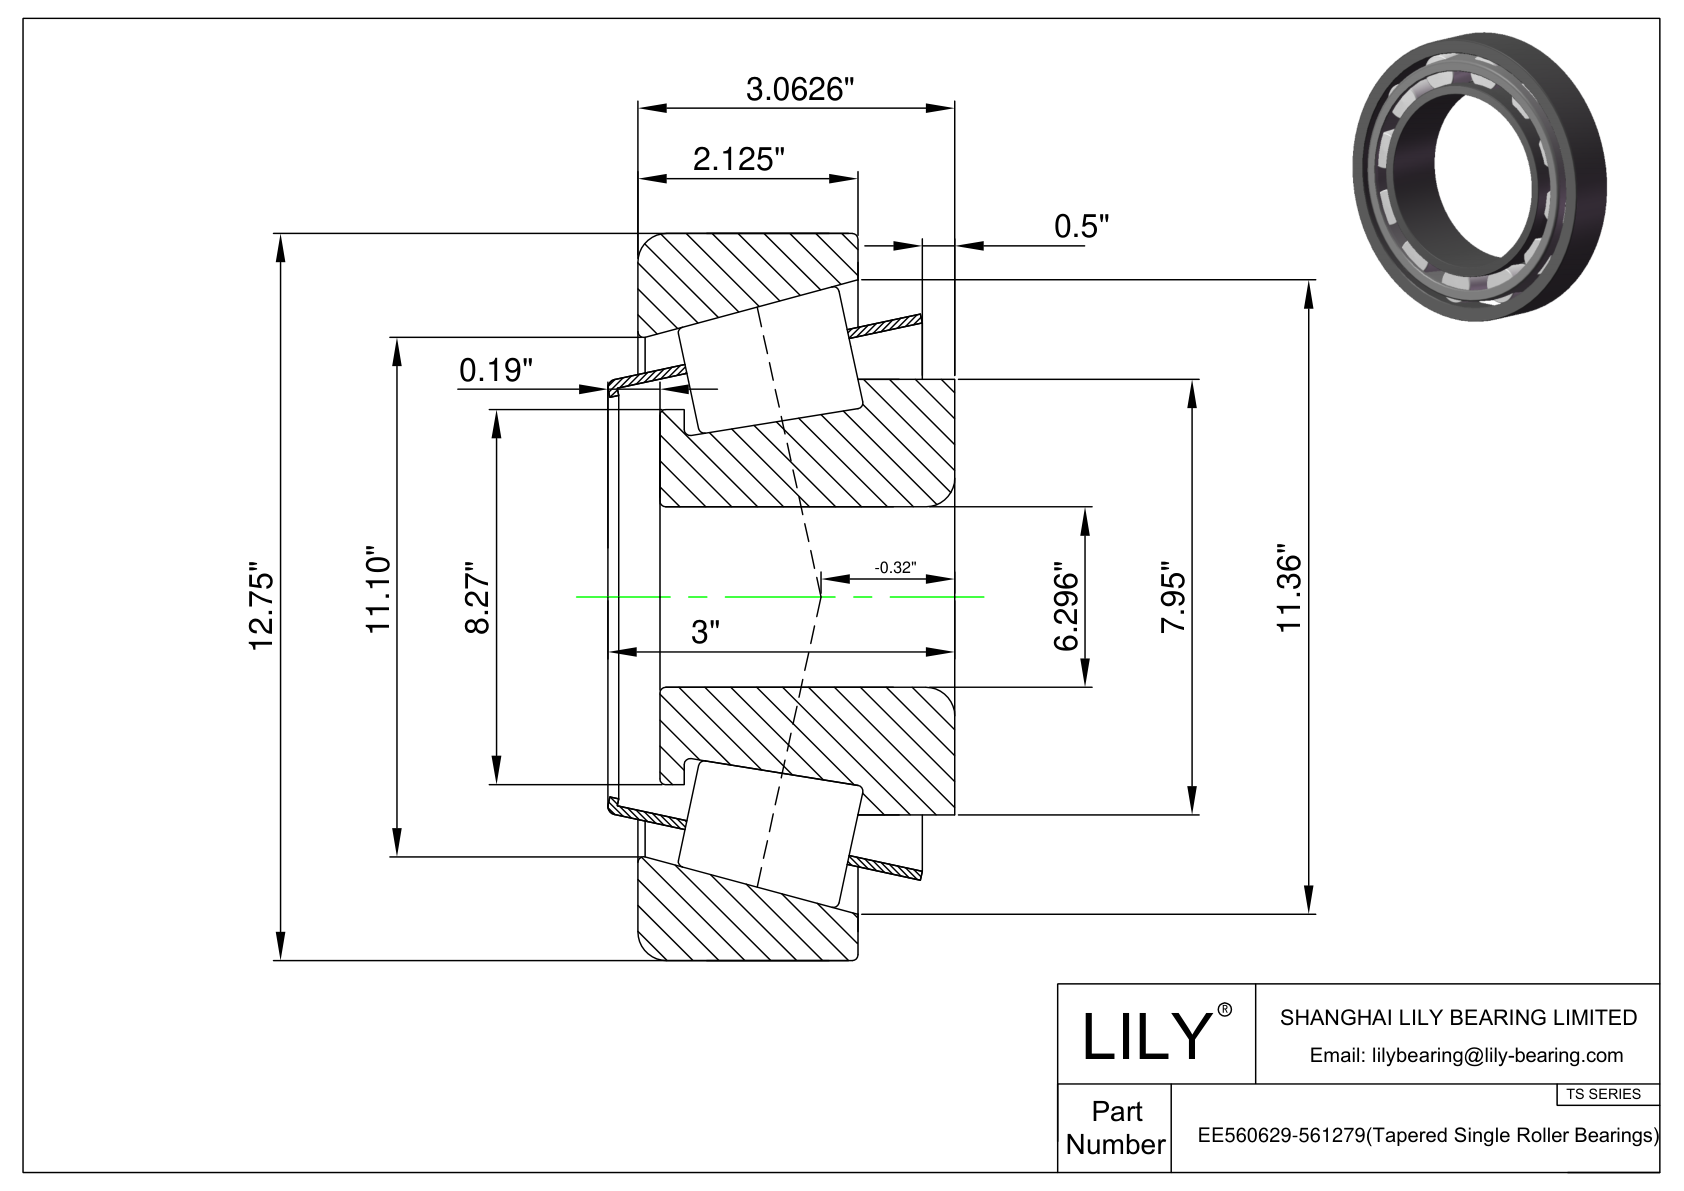 EE560629-561279 TS (Tapered Single Roller Bearings) (Imperial) cad drawing